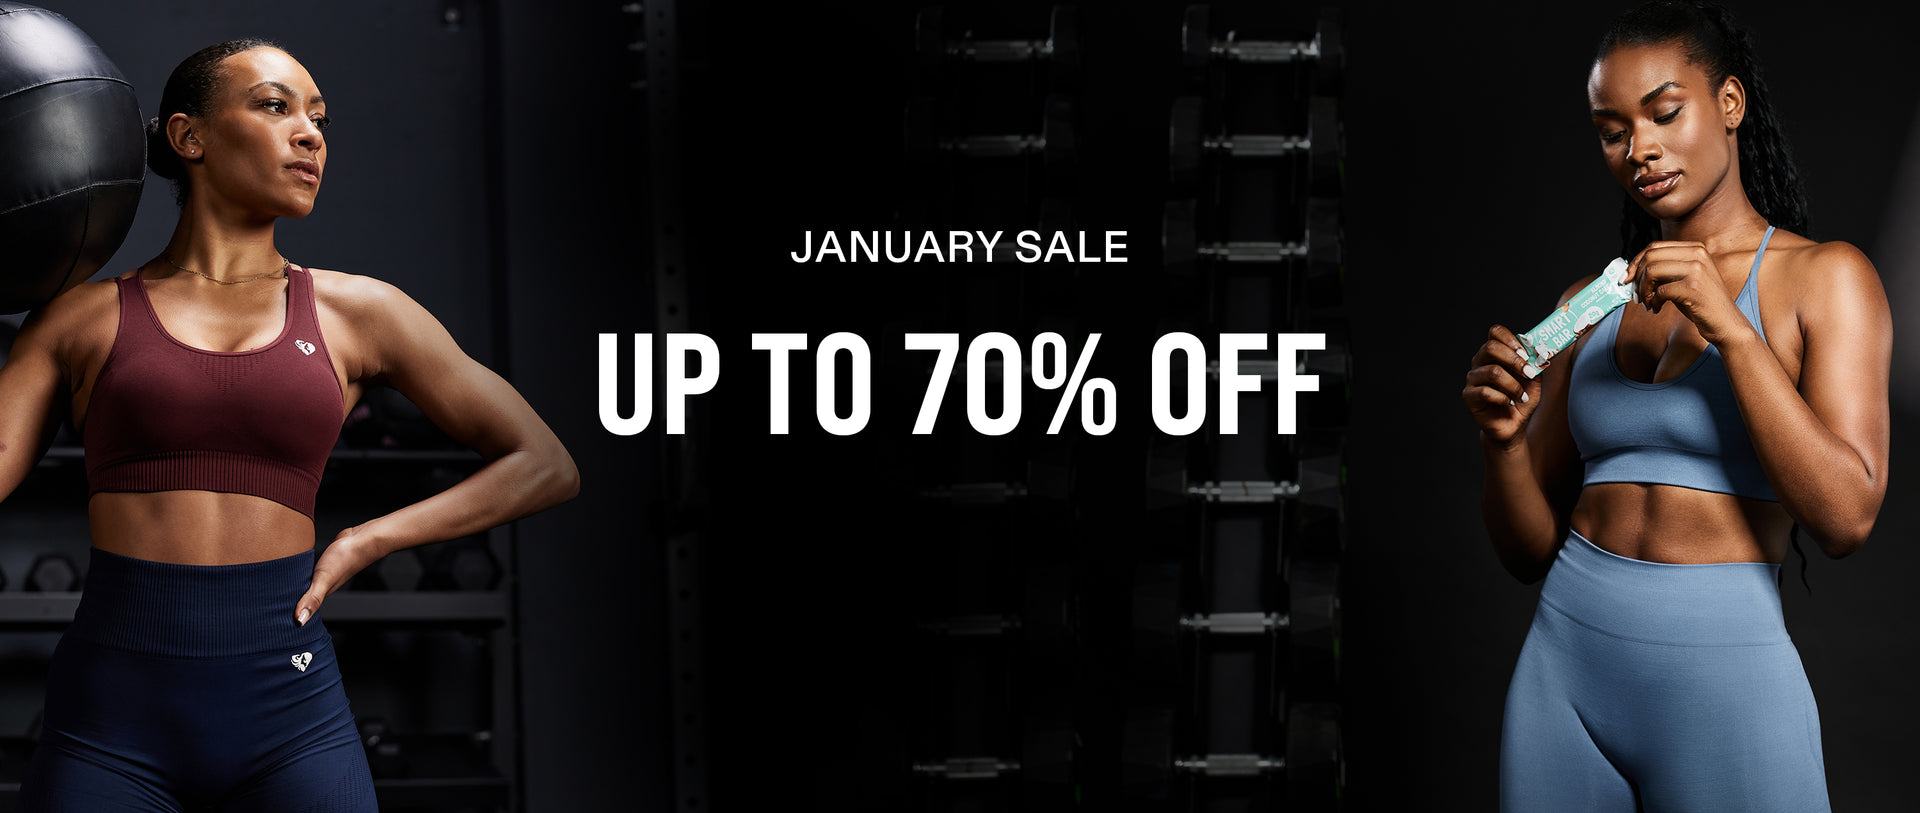 Under Armour OUTLET in Germany • Sale up to 70% off